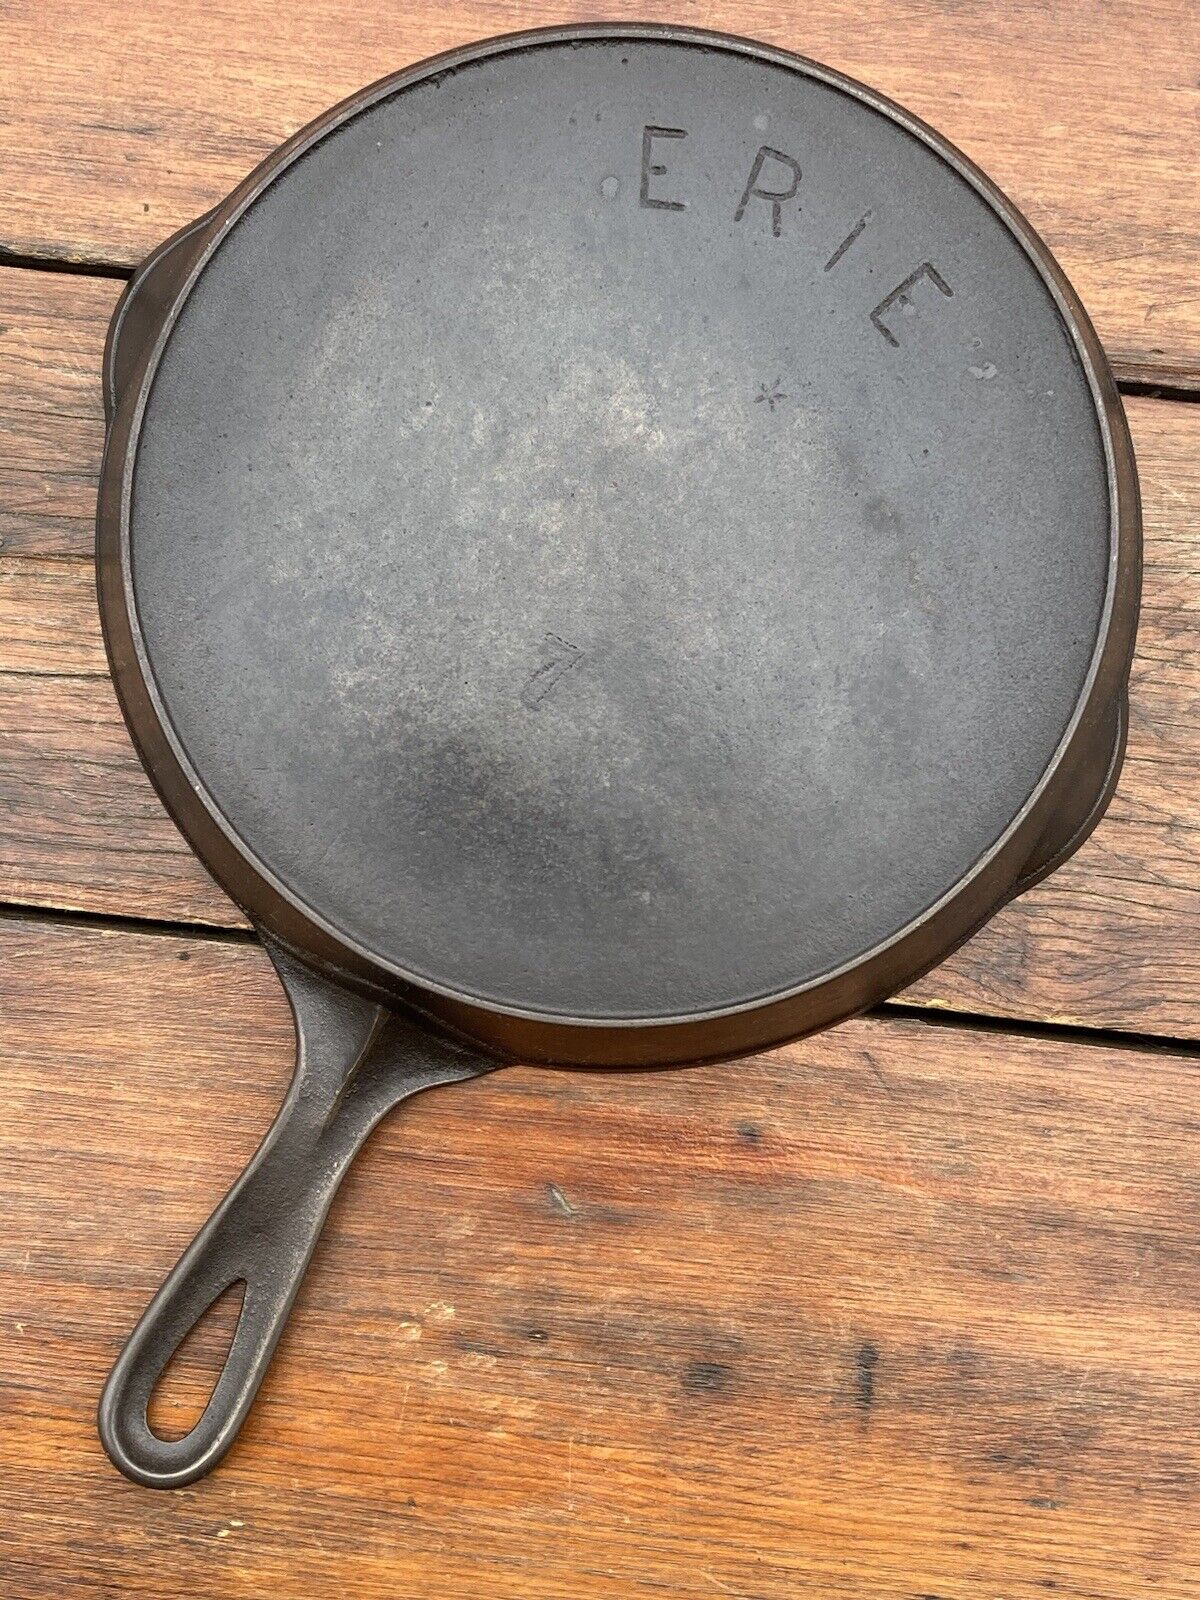 Pre Griswold Erie #7 Cast Iron Skillet and 5 Point Star Maker’s Mark RARE